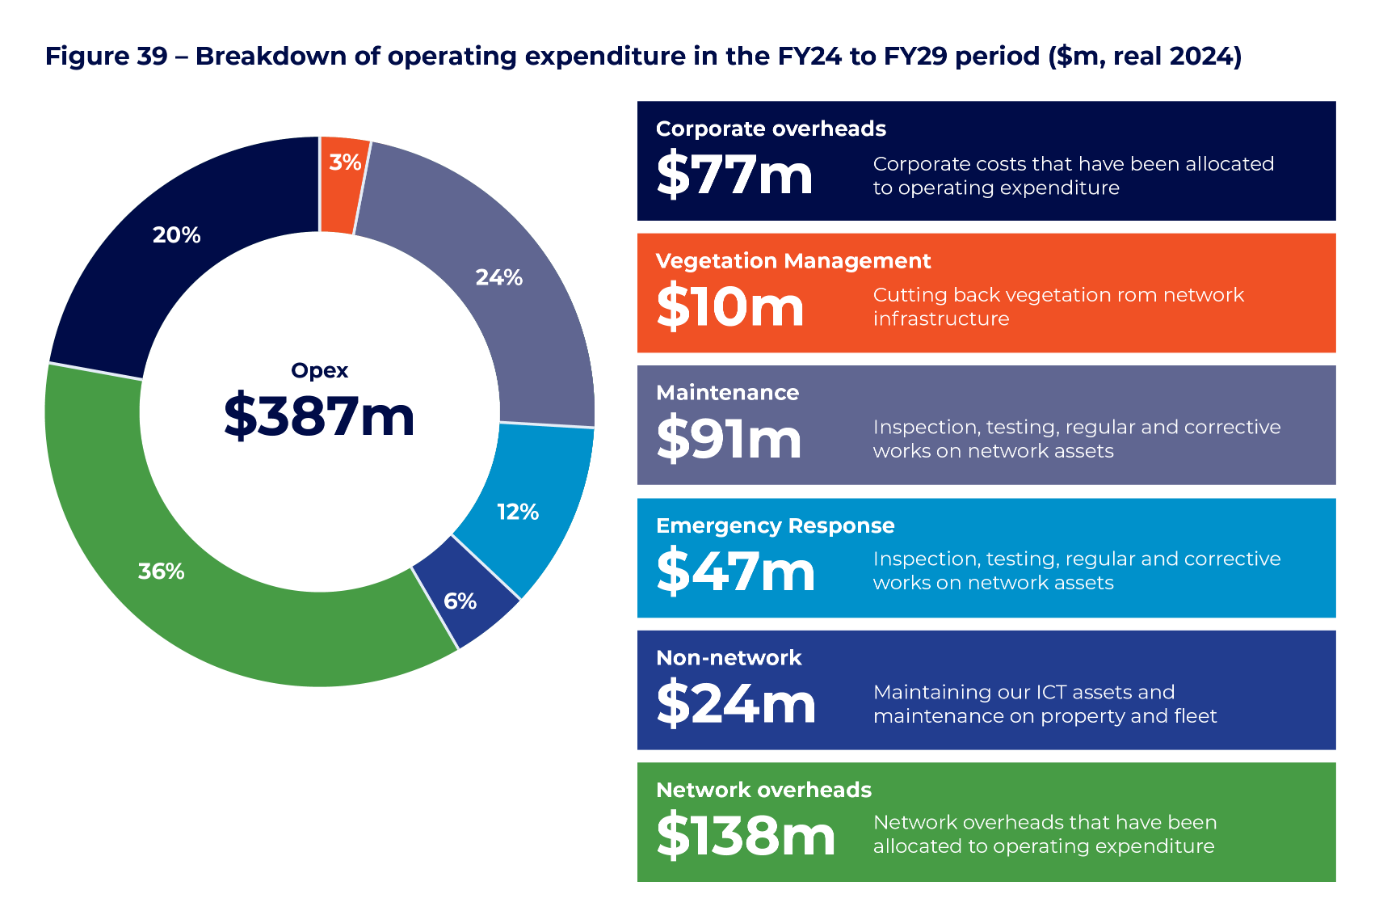 Figure 39 - Breakdown of operating expenditure in the FY24 to FY29 period